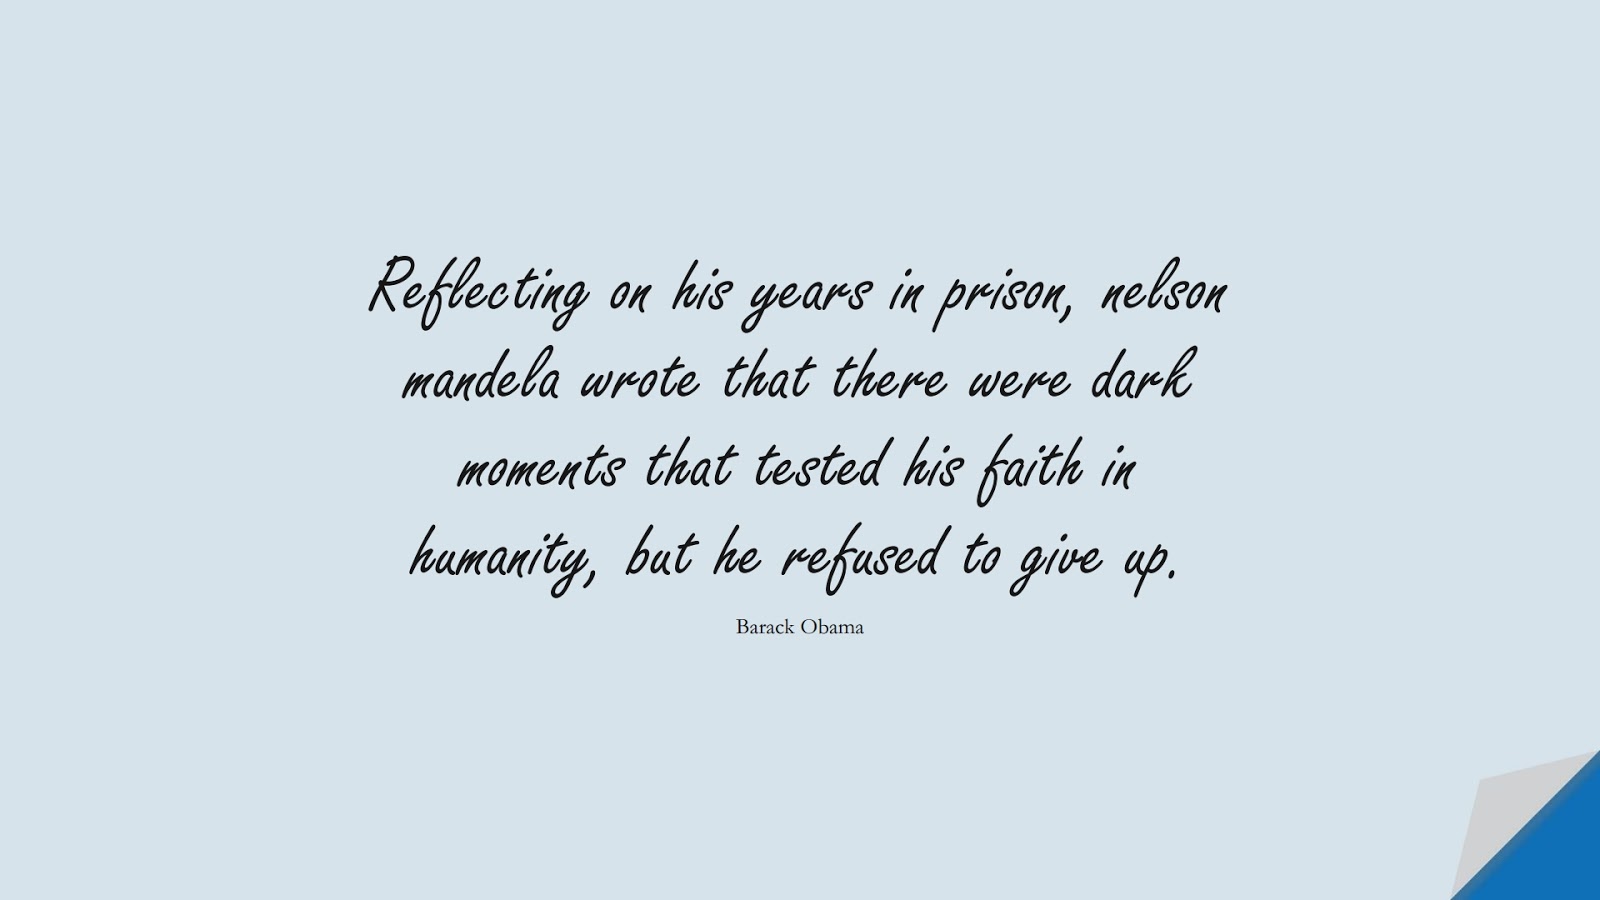 Reflecting on his years in prison, nelson mandela wrote that there were dark moments that tested his faith in humanity, but he refused to give up. (Barack Obama);  #HumanityQuotes